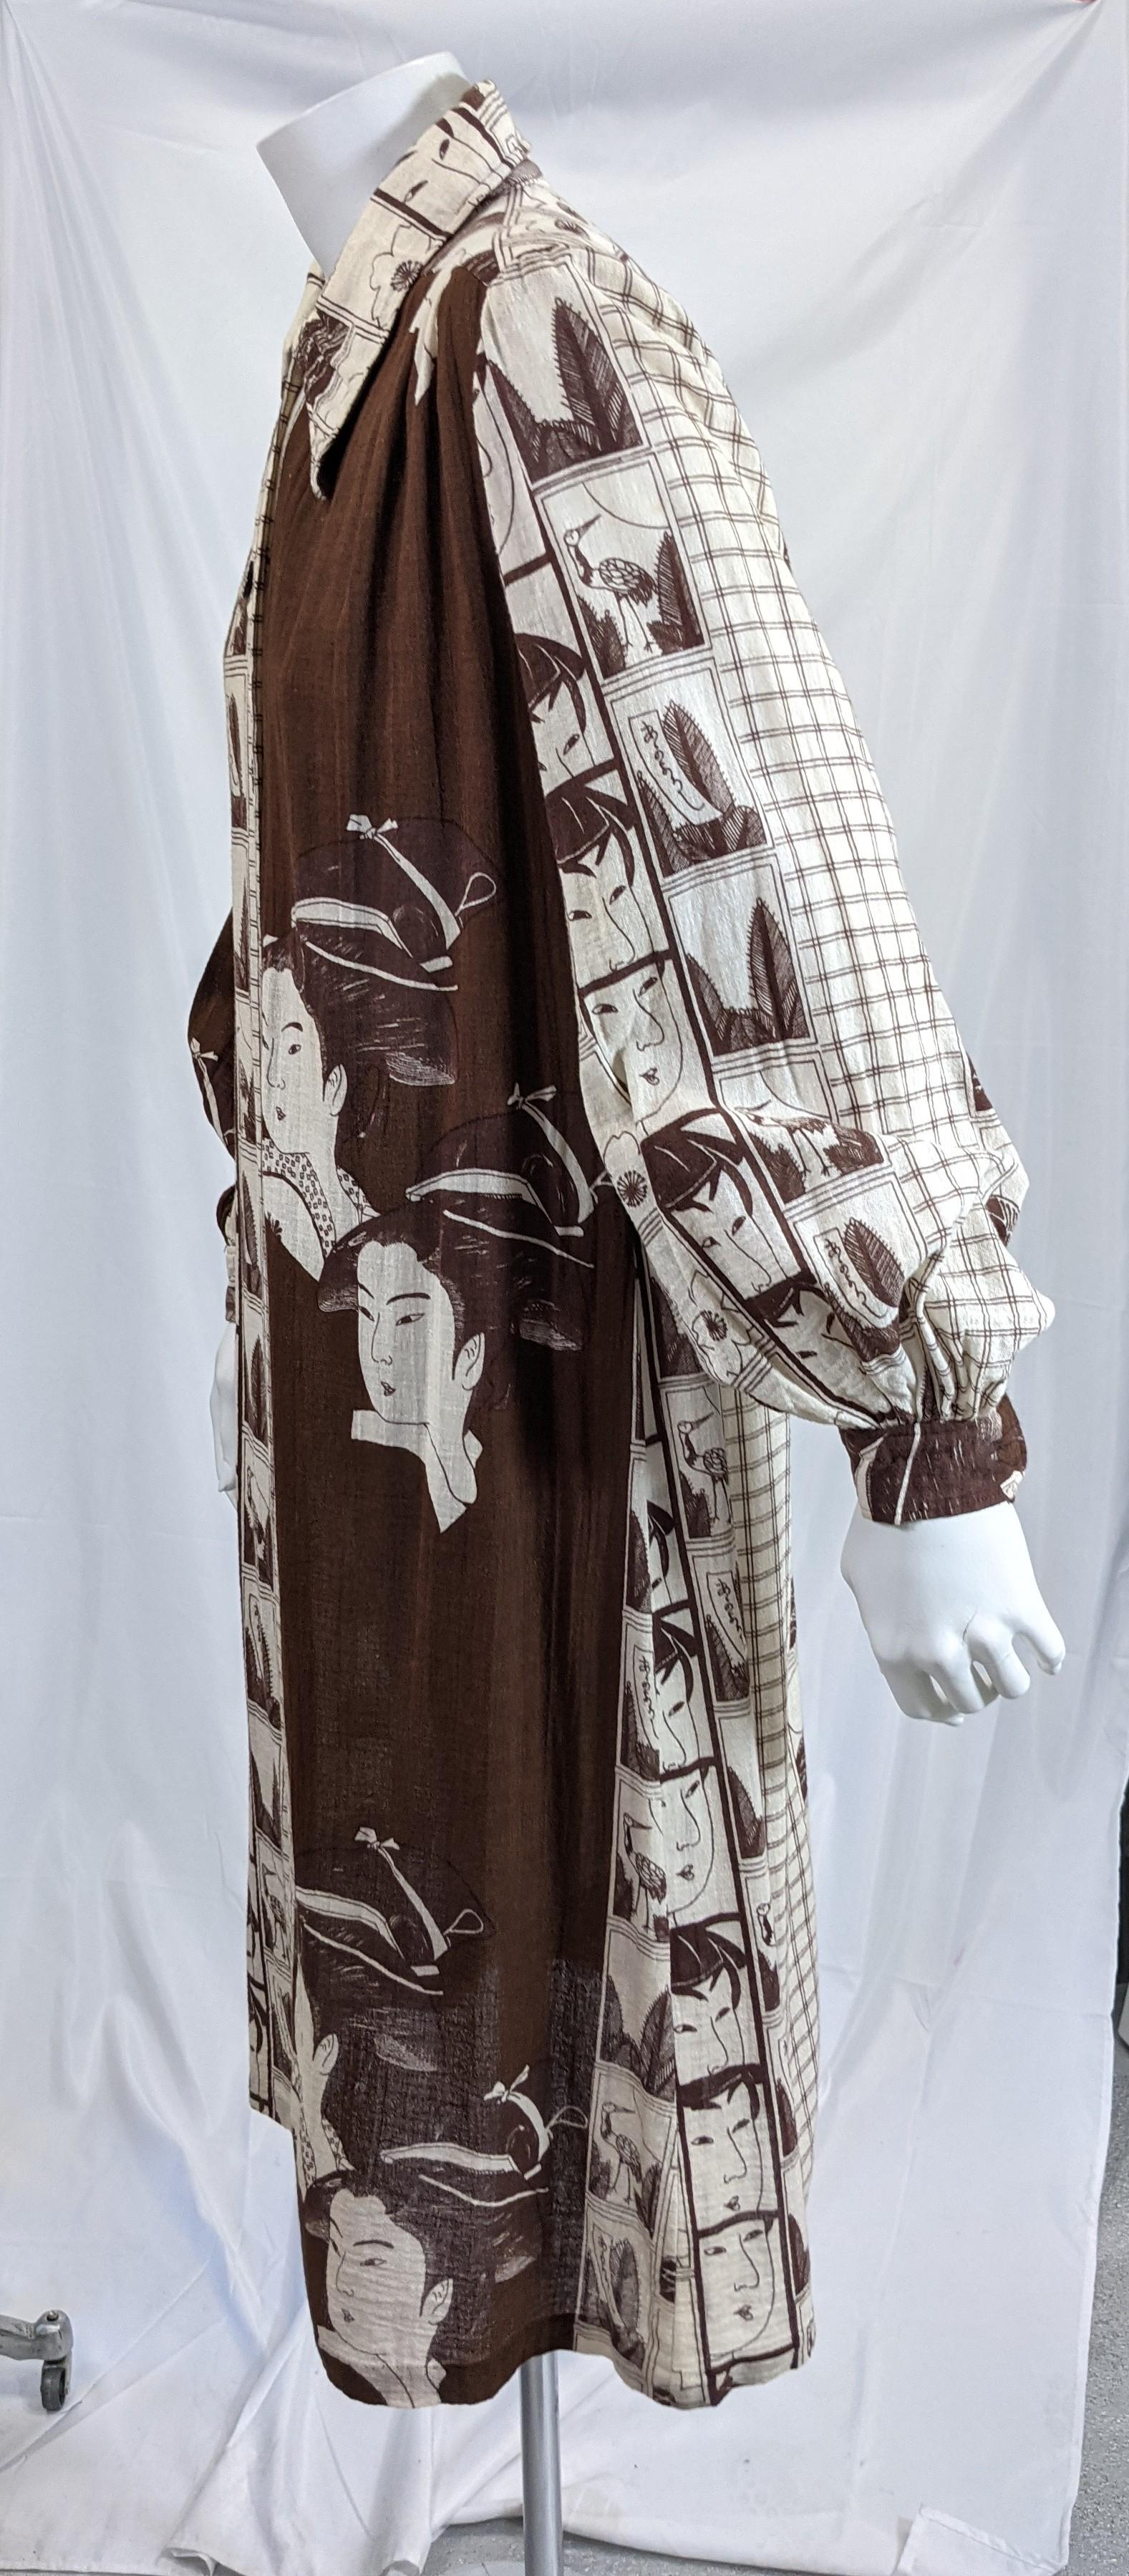 Hanae Mori long sleeved crinkle cotton gauze print dress. Printed with double geisha faces and film strip like blocks of japanesque images on a deep brown and white background. Simple loose fitting shirtdress, styling works well with self